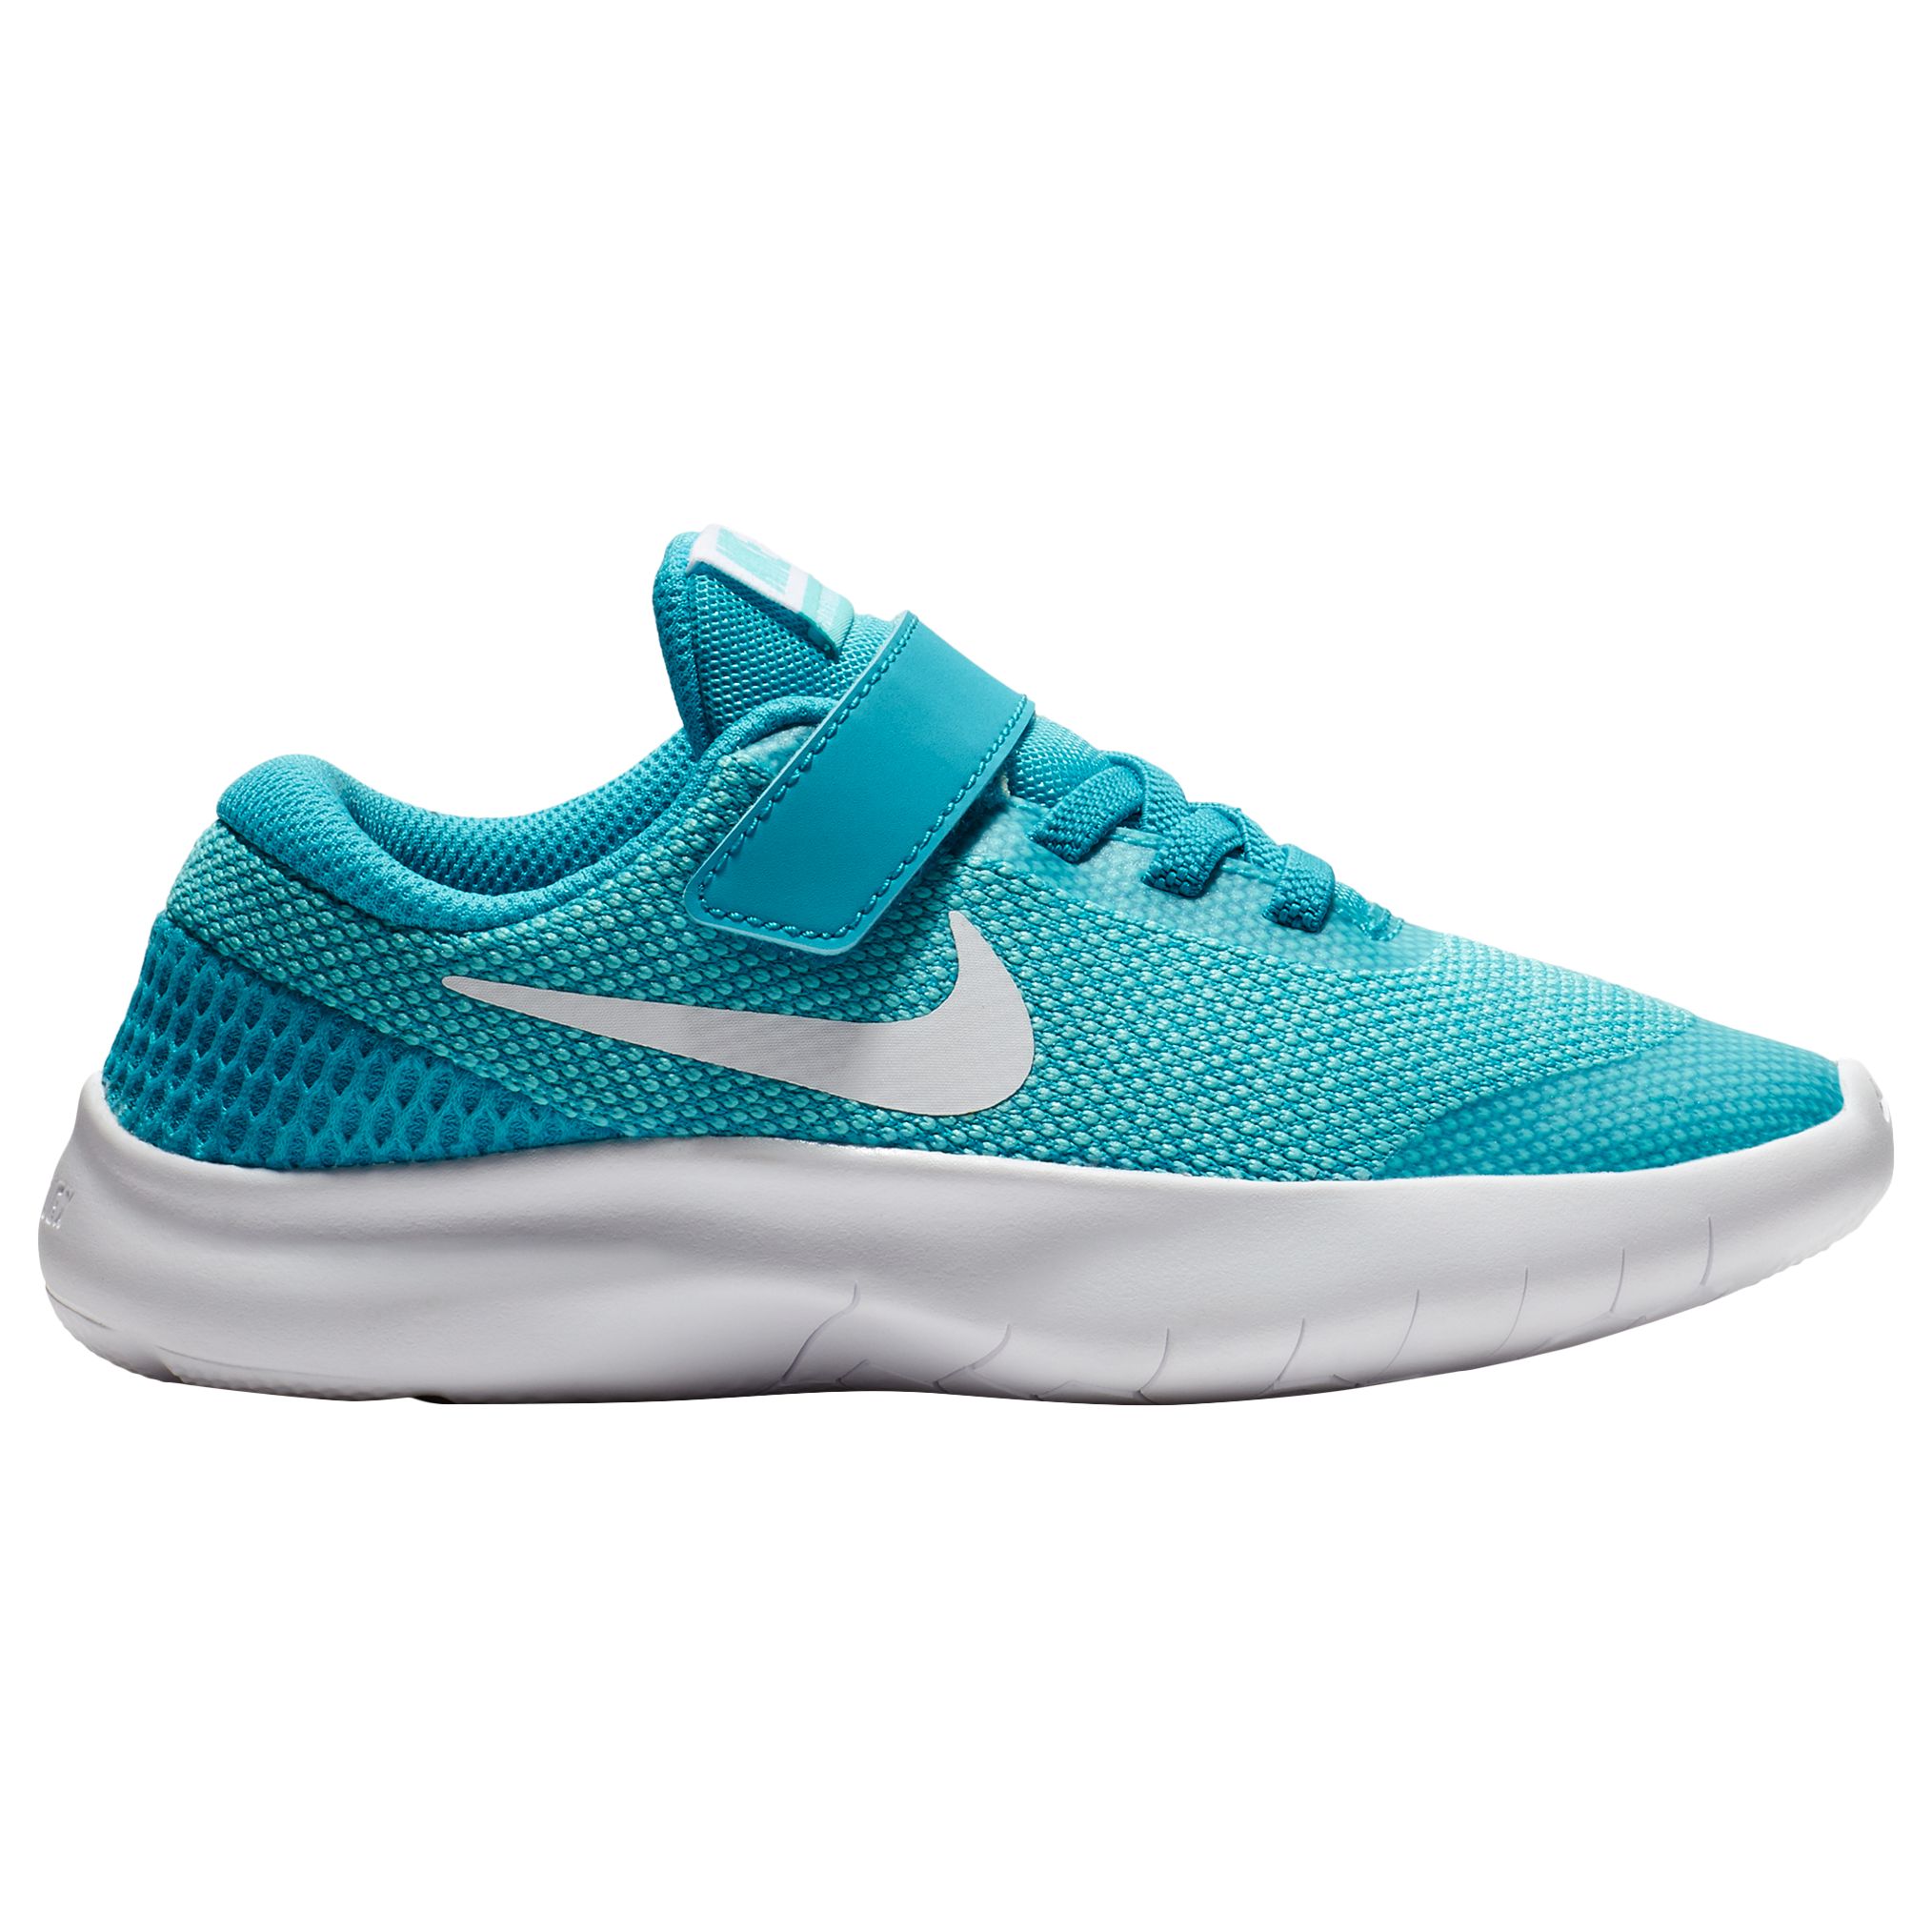 Nike Children's Flex Experience Run 7 PS Trainers, Turquoise, 2